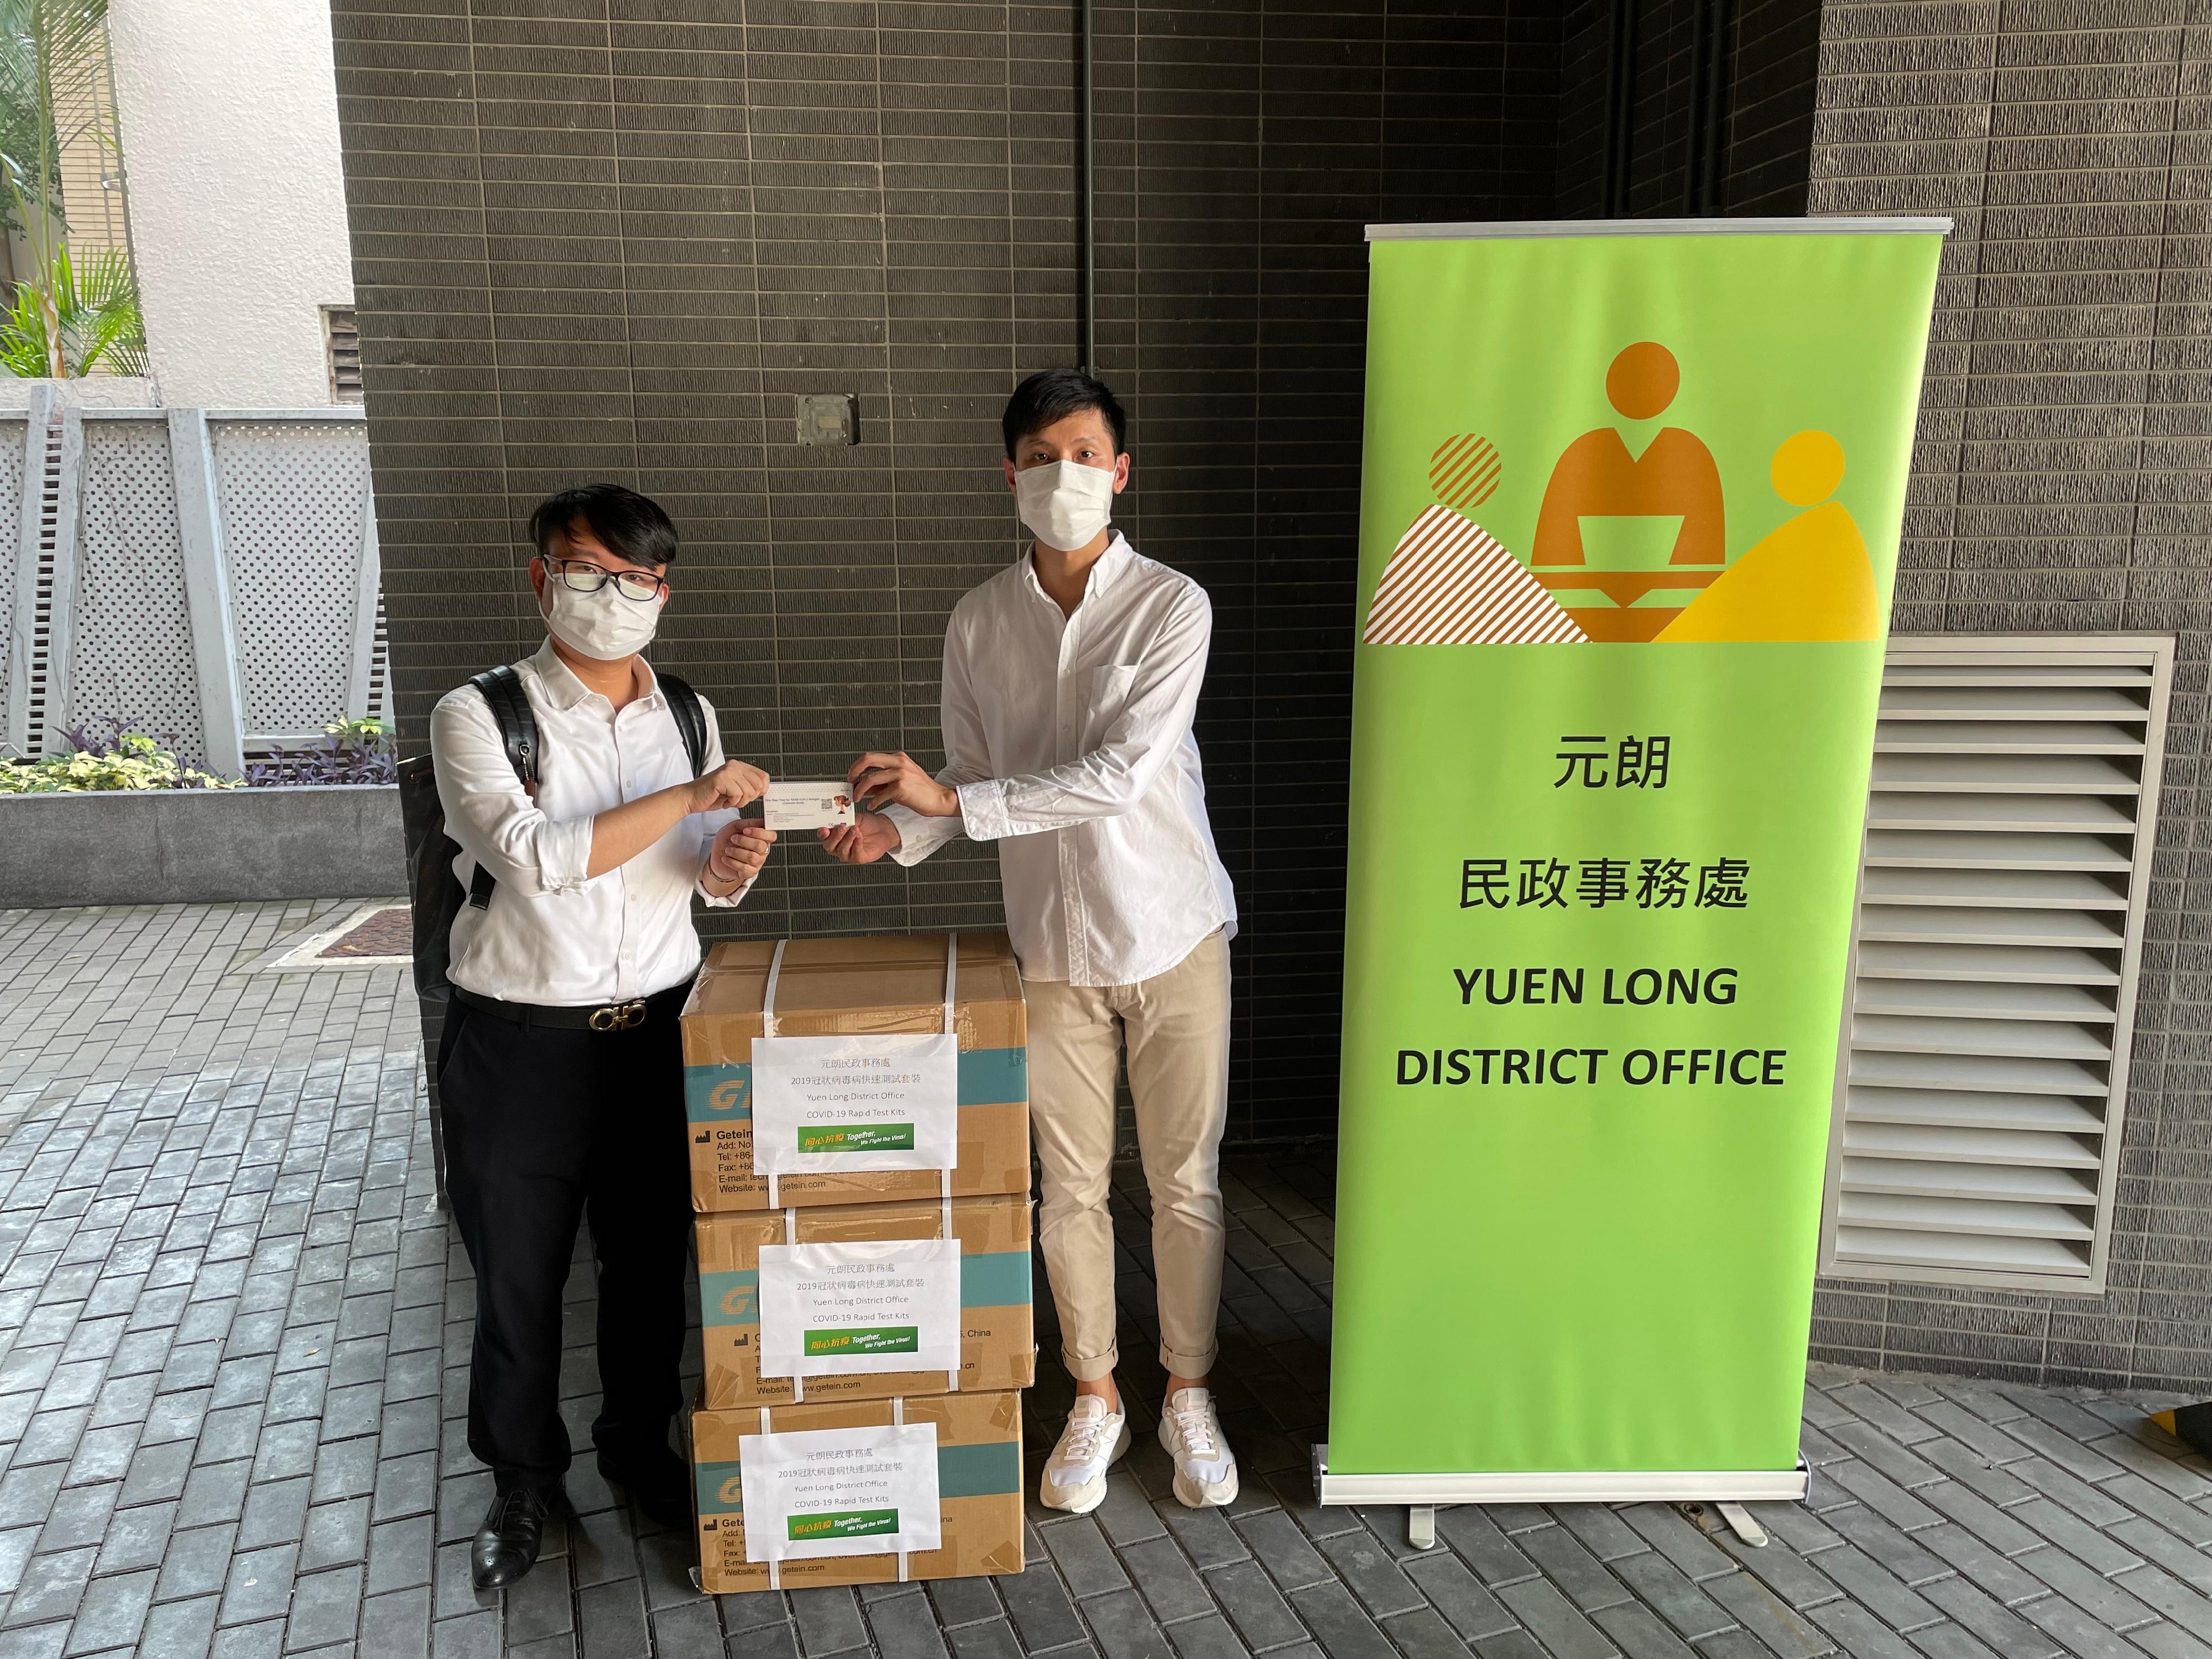 The Yuen Long District Office today (July 29) distributed COVID-19 rapid test kits to households, cleansing workers and property management staff living and working in Symphony Garden for voluntary testing through the property management company.